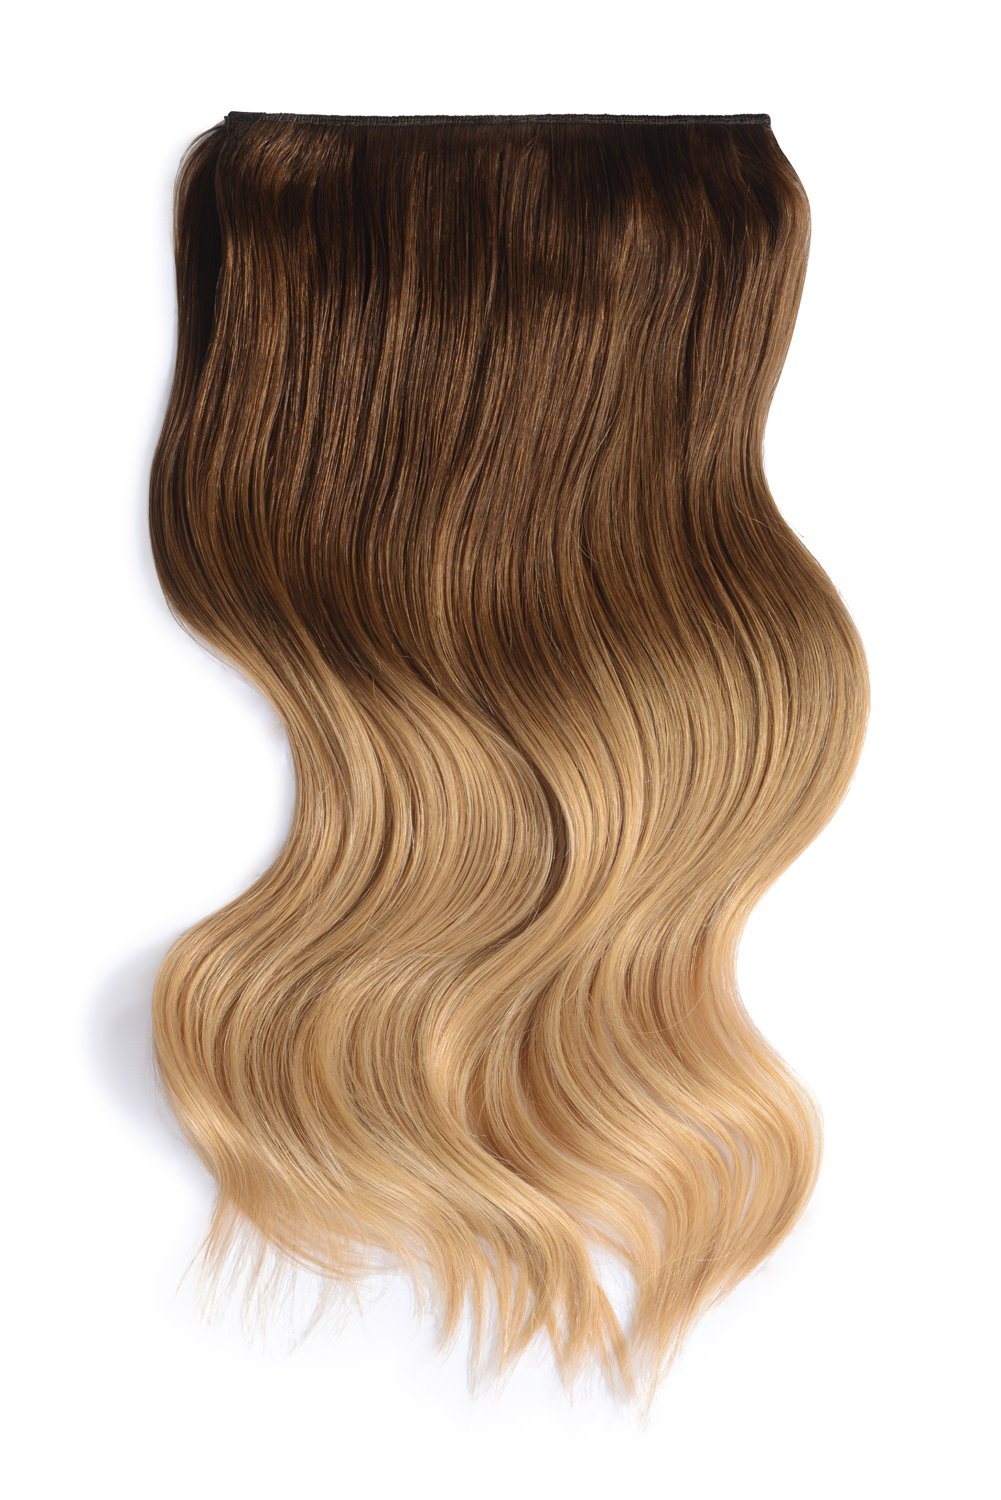 Double Wefted Full Head Remy Clip in Human Hair Extensions - ombre/Ombre (#T6/27) Ombre Clip In Hair Extensions cliphair 